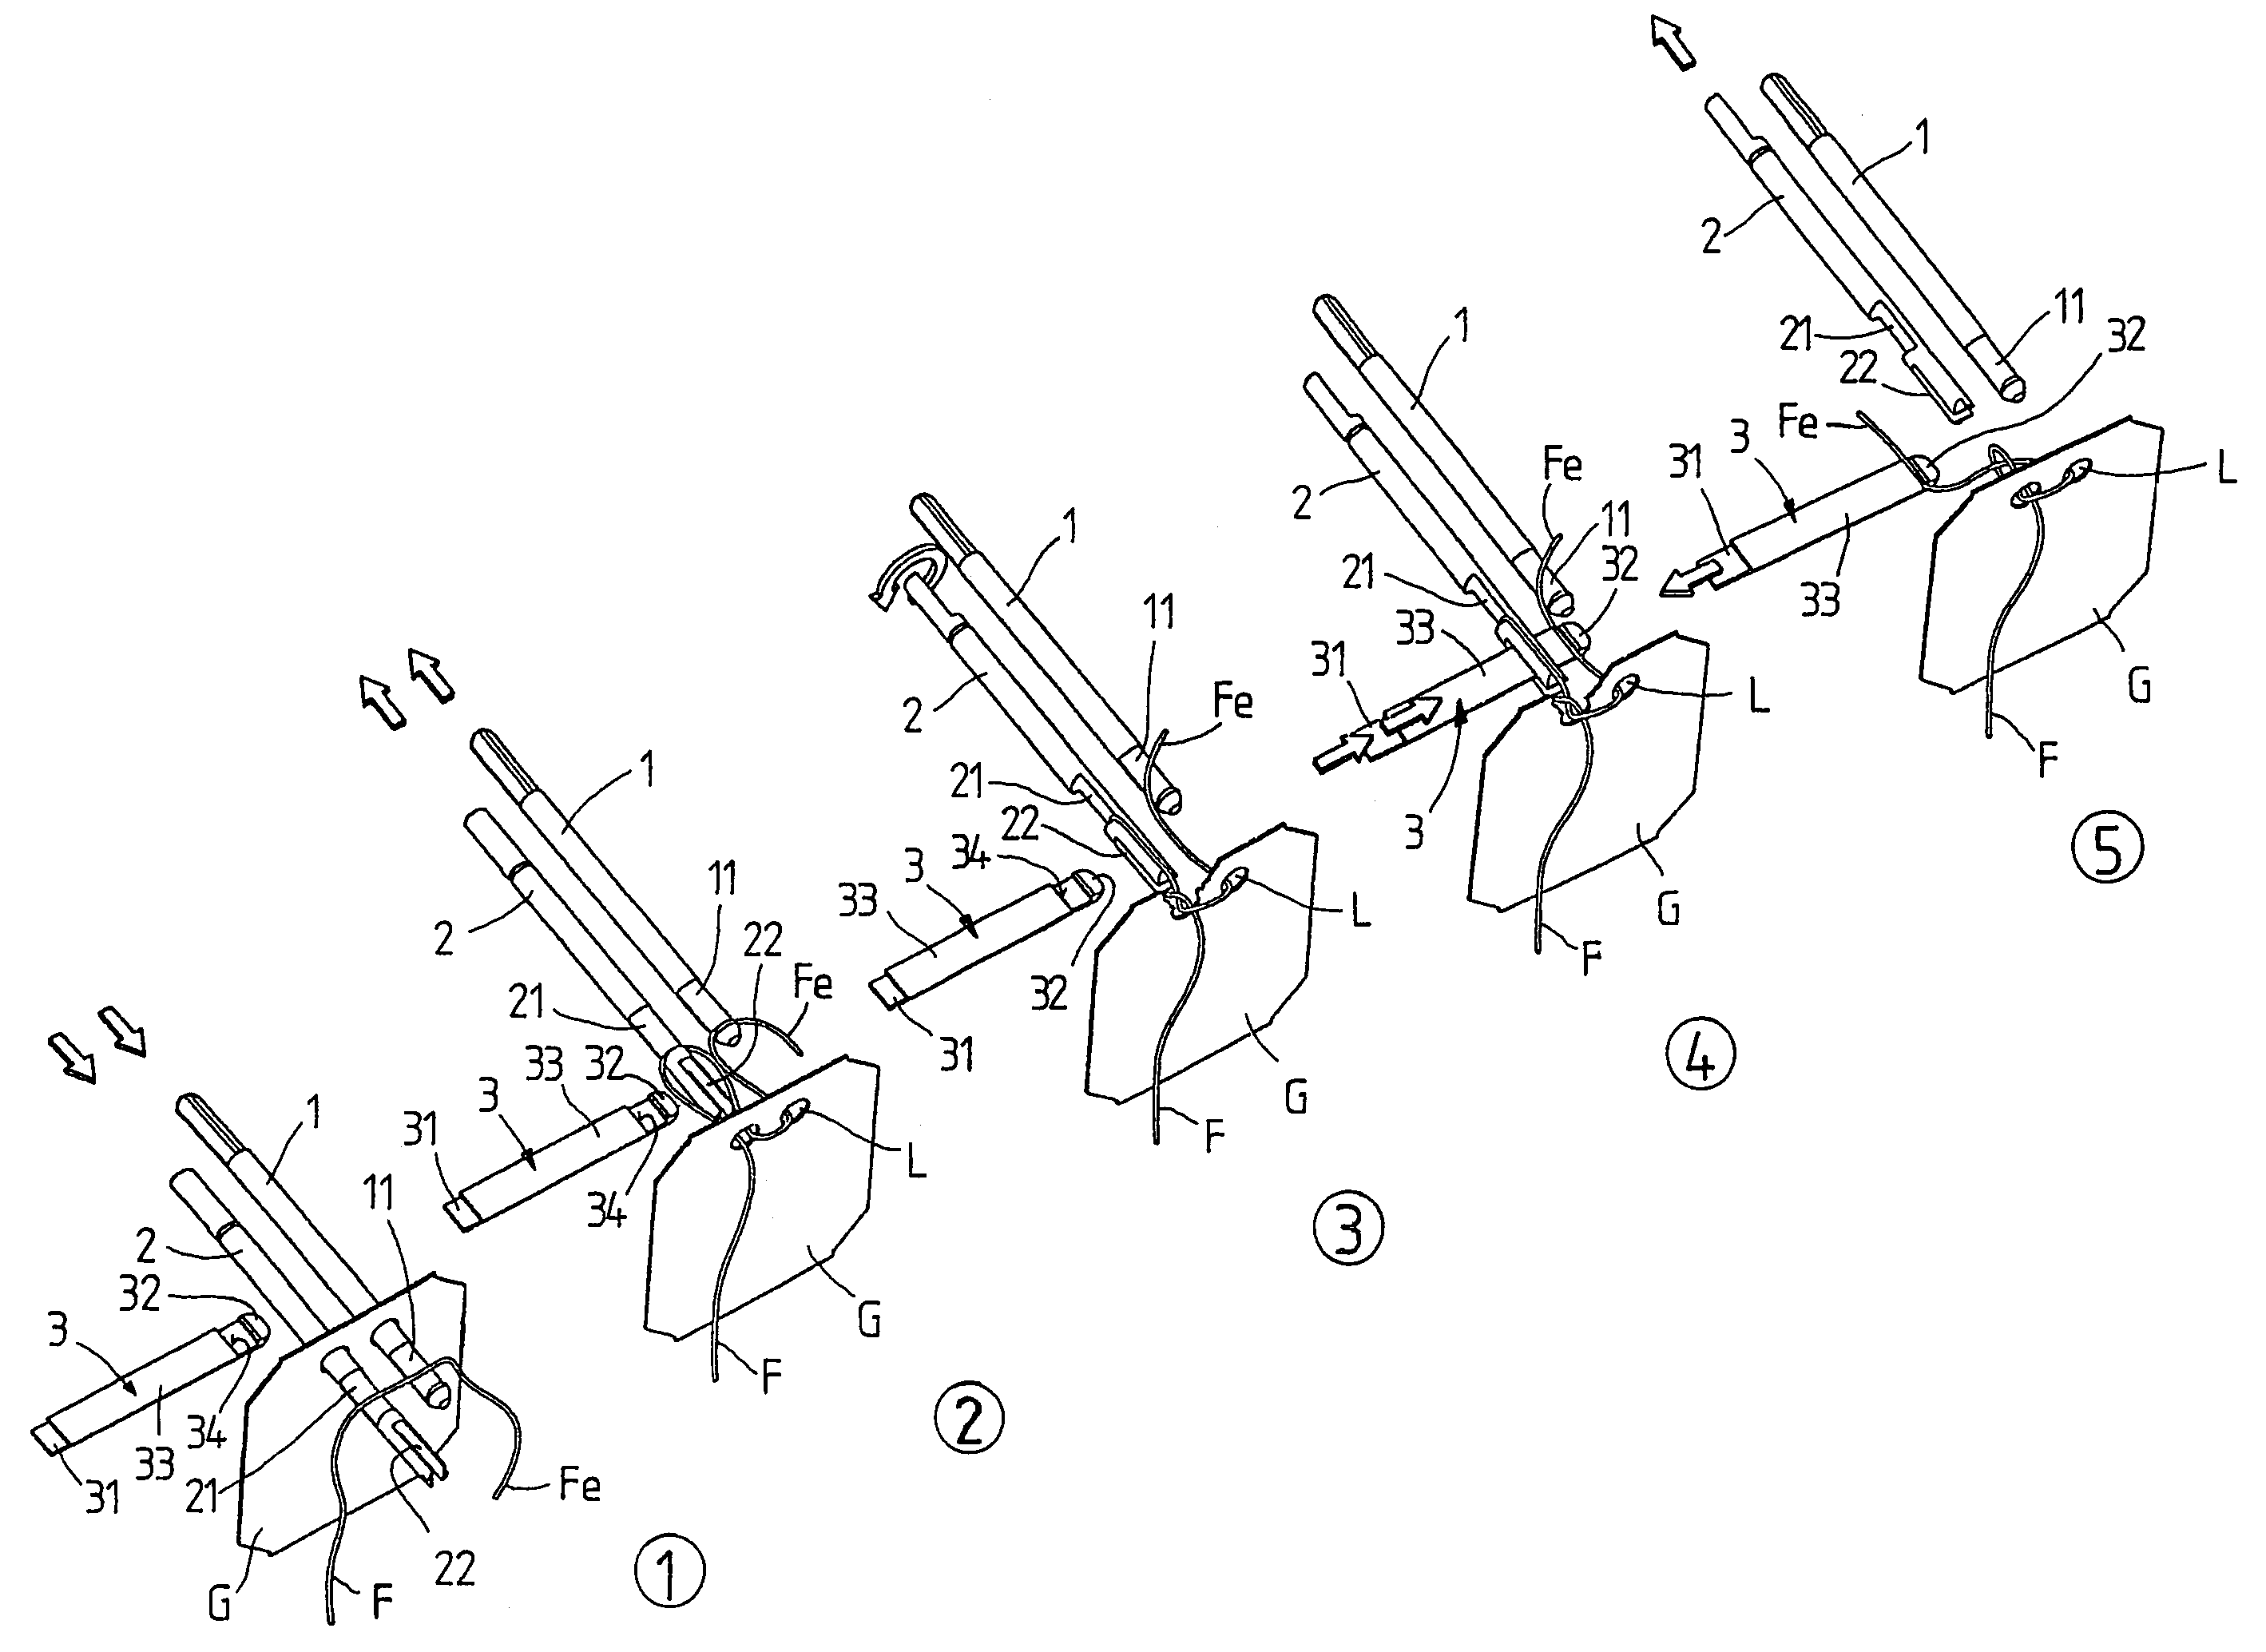 Method and device for knotting the end of a thread to a flat object